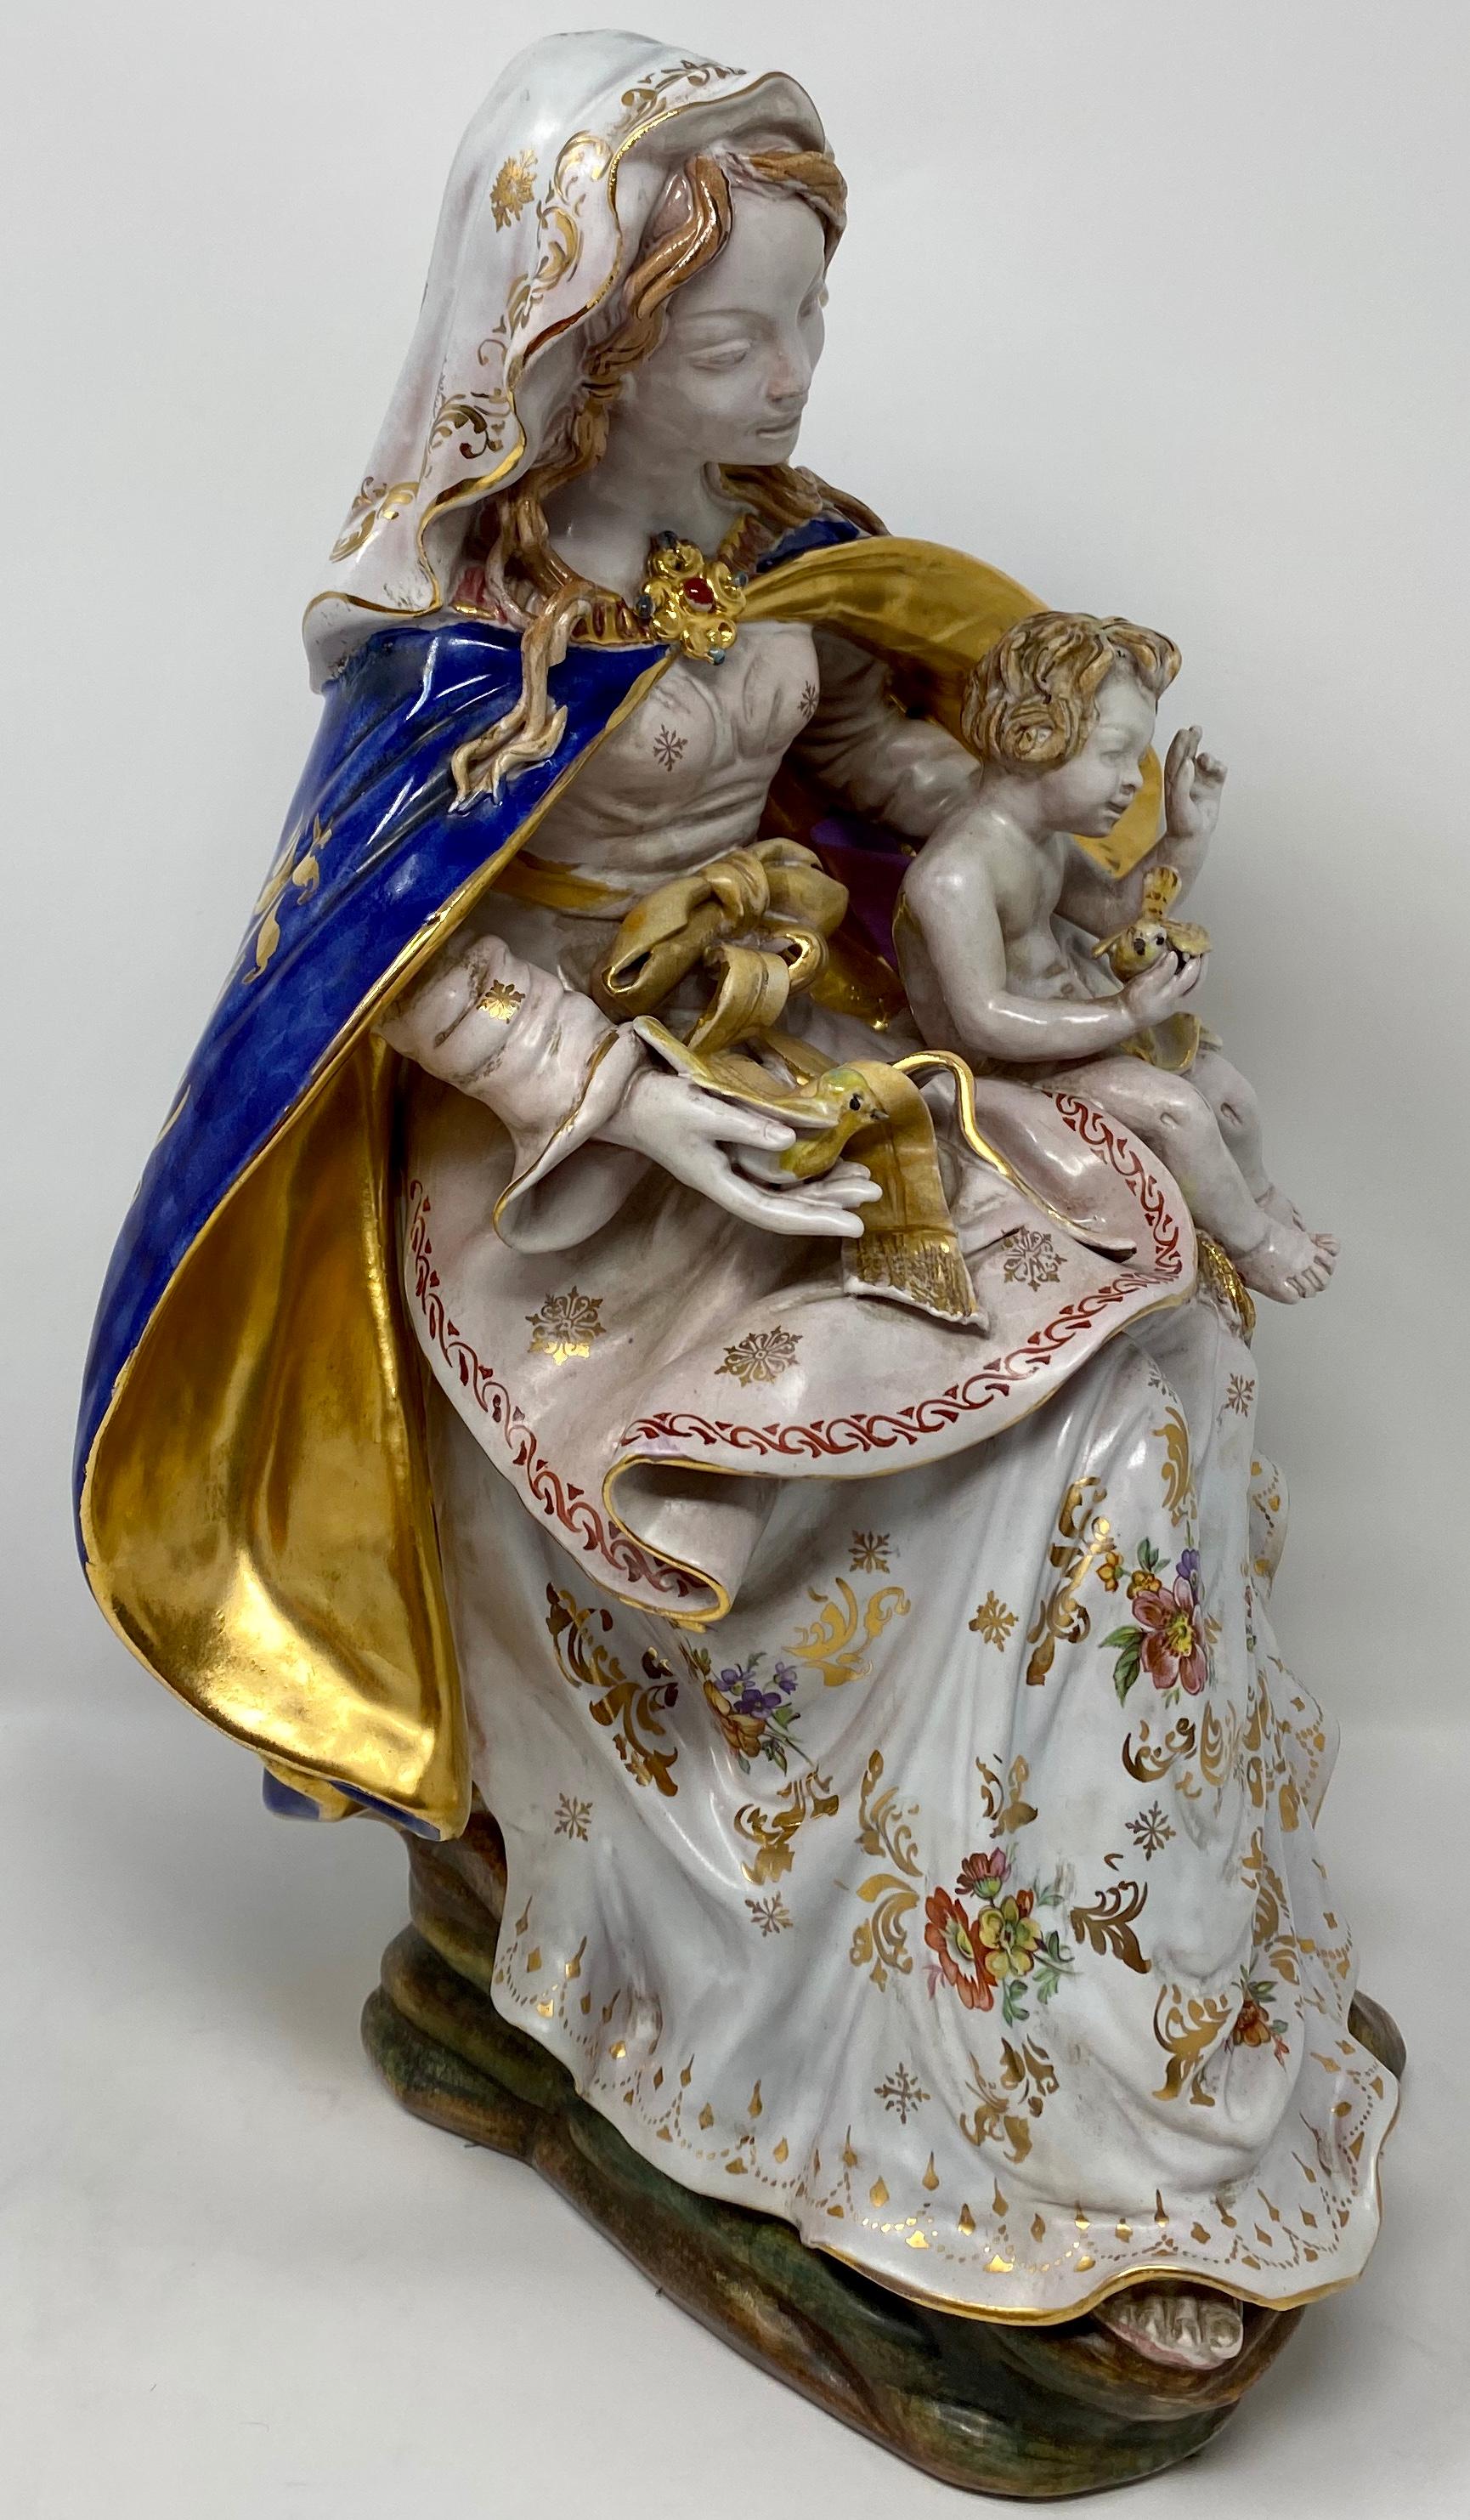 Original porcelain figure of mother and child signed by S. Marchi, circa 1930-1945.
EPR125.